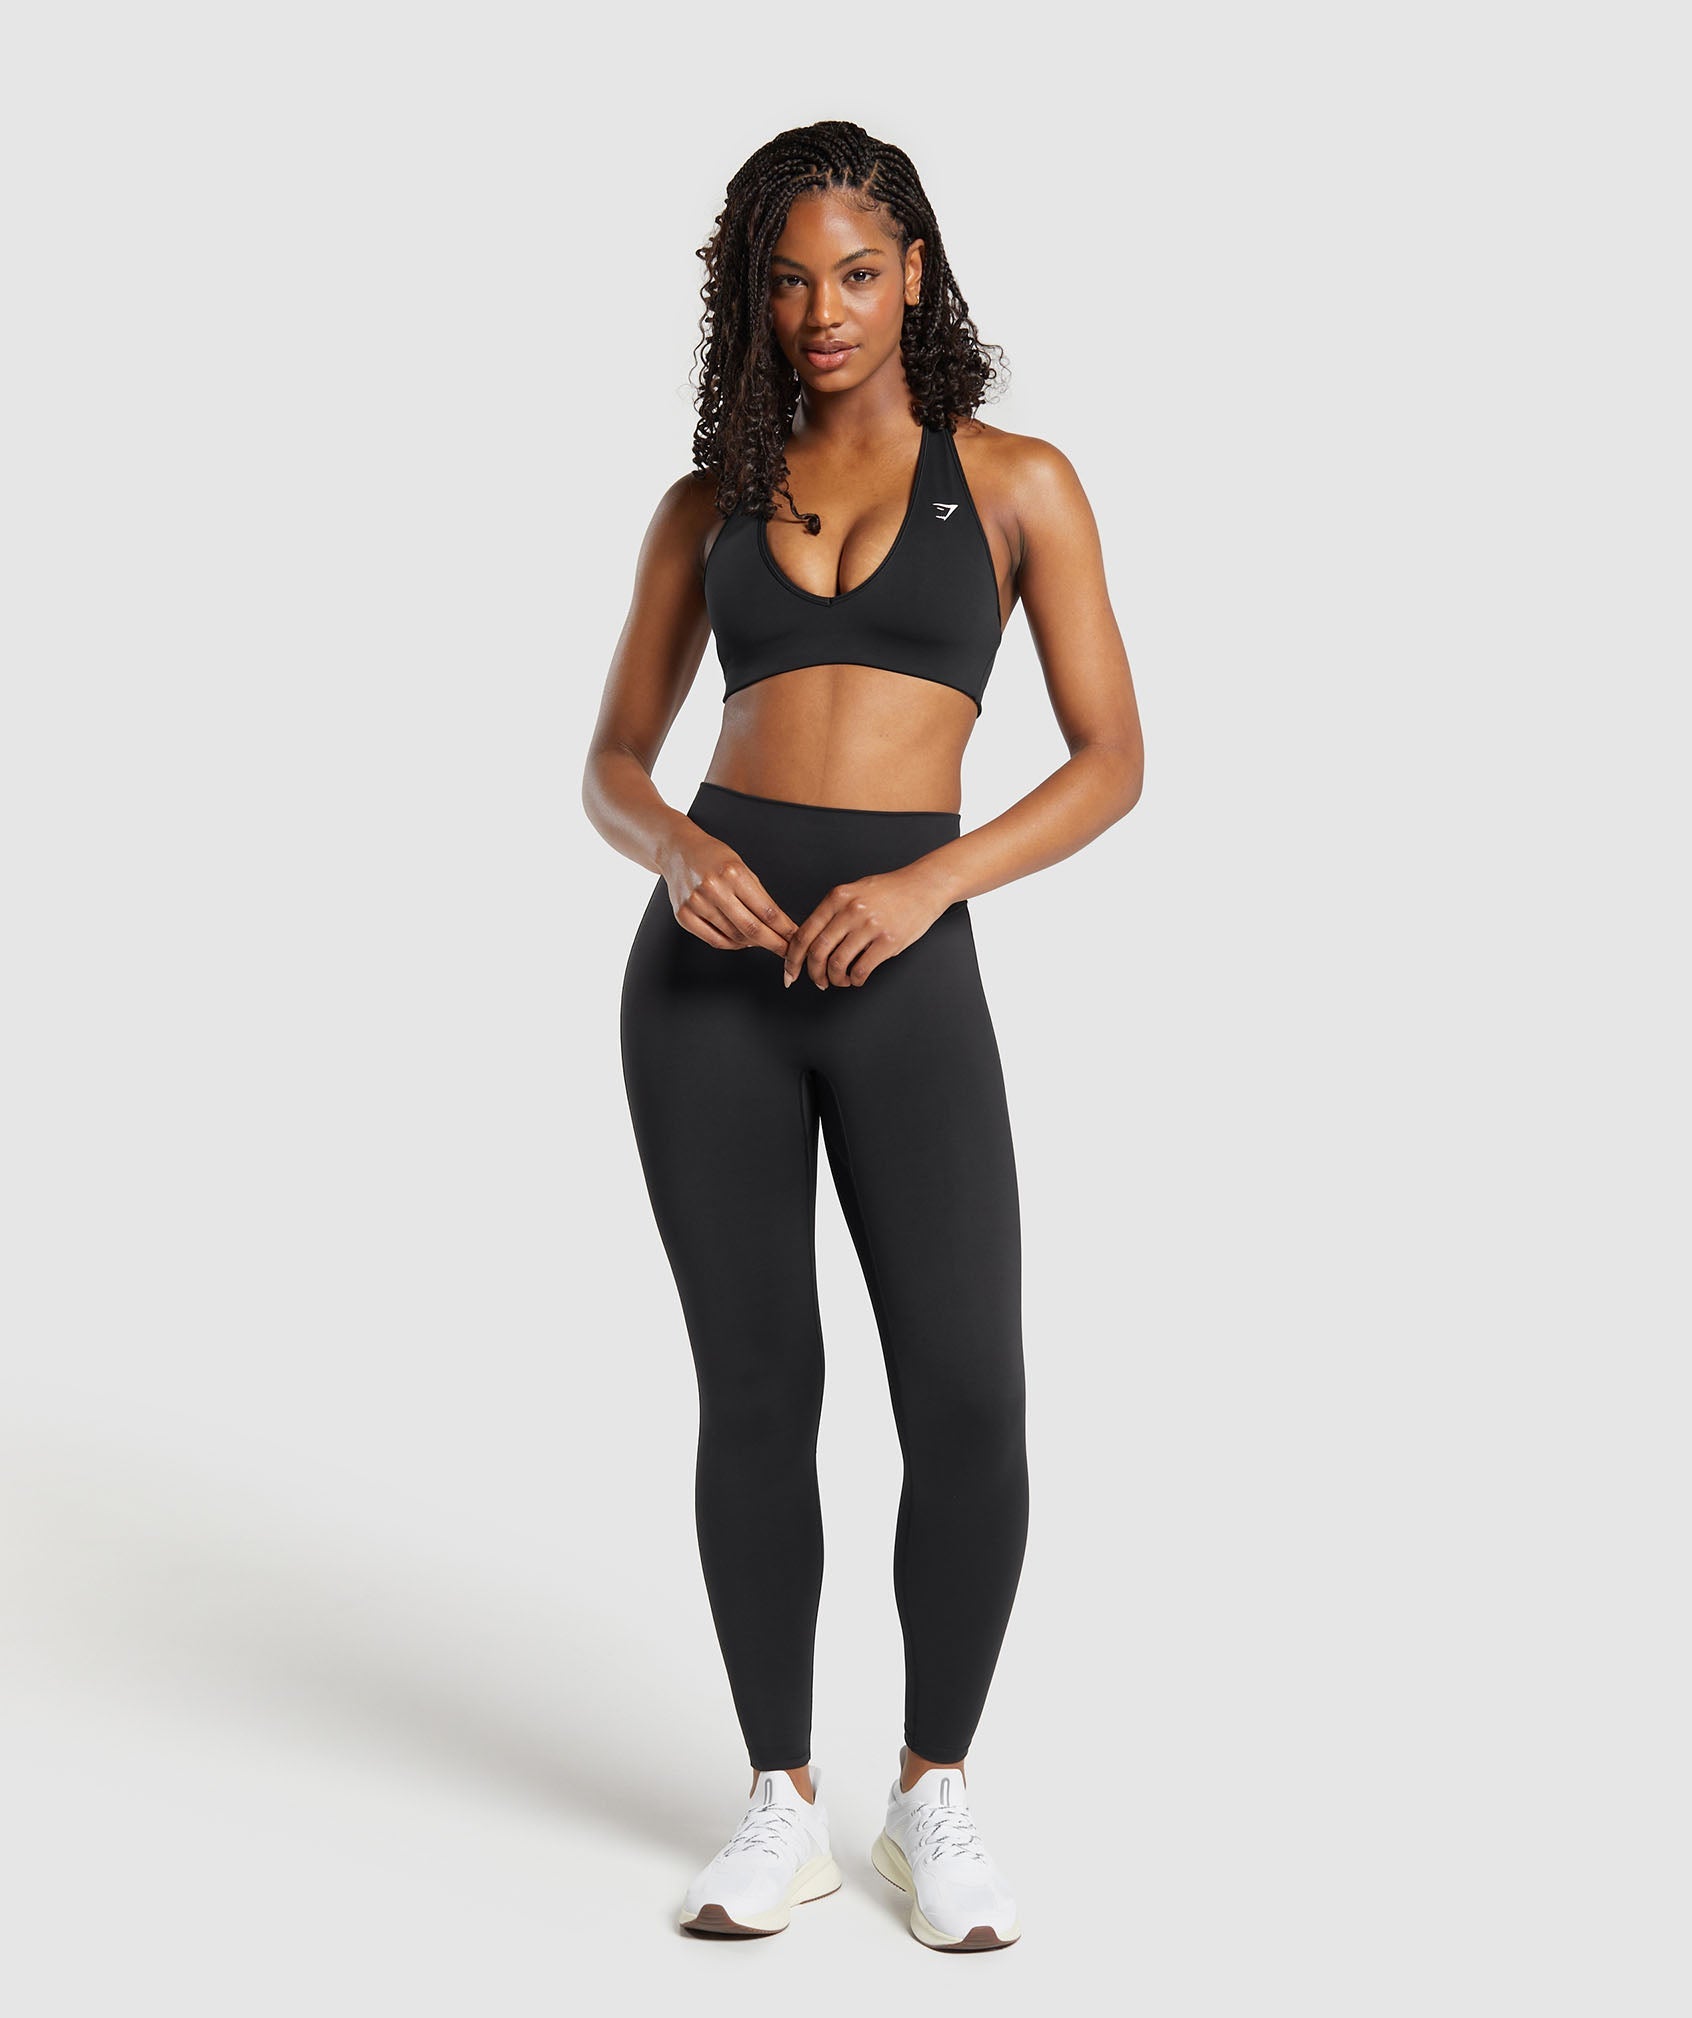 Fshion Gymshark Yoga Set Womens Tracksuit Tenis Rugby Pullover Leggings  Sport Bra Designer Pant Gymshark Workout Outfits Two Piece Set Woman From  Skvincent, $22.51